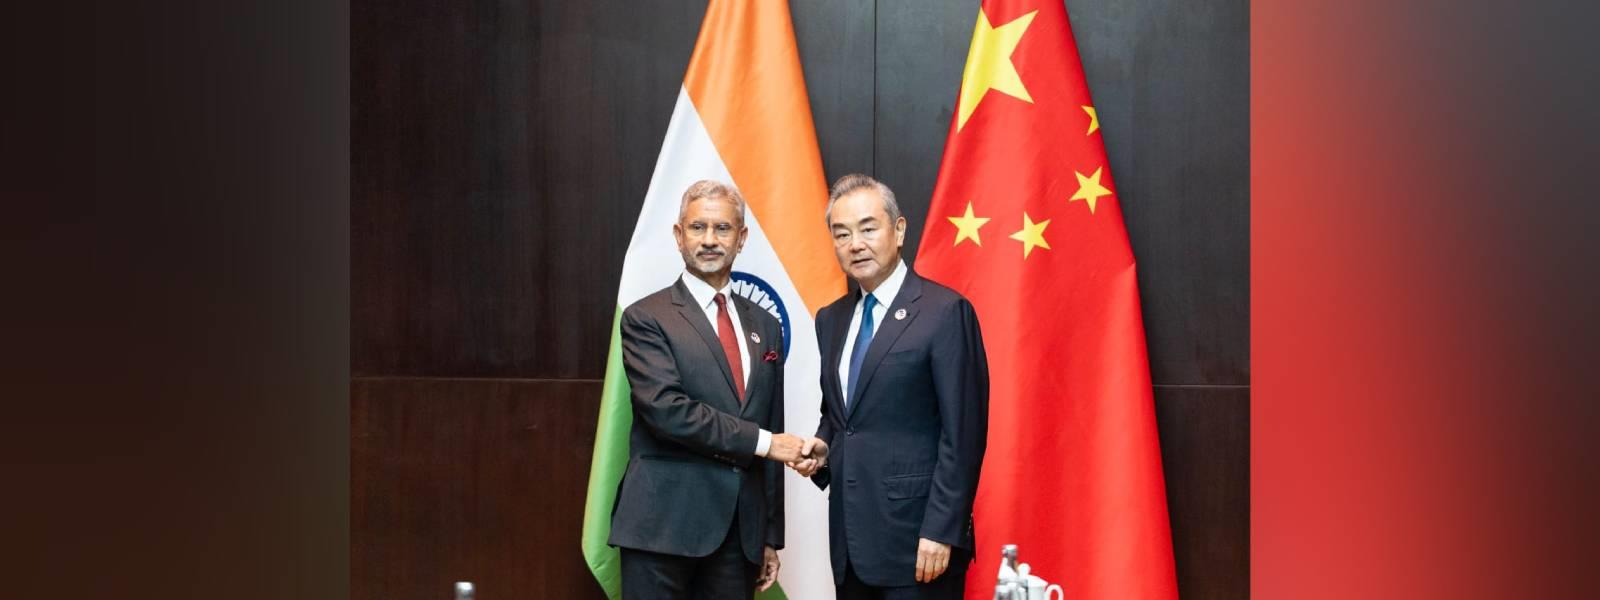 External Affairs Minister, Dr. S. Jaishankar met H.E. Mr. Wang Yi, Member of the Communist Party of China (CPC) Politburo and Foreign Minister of China on the sidelines of ASEAN meetings in Vientiane